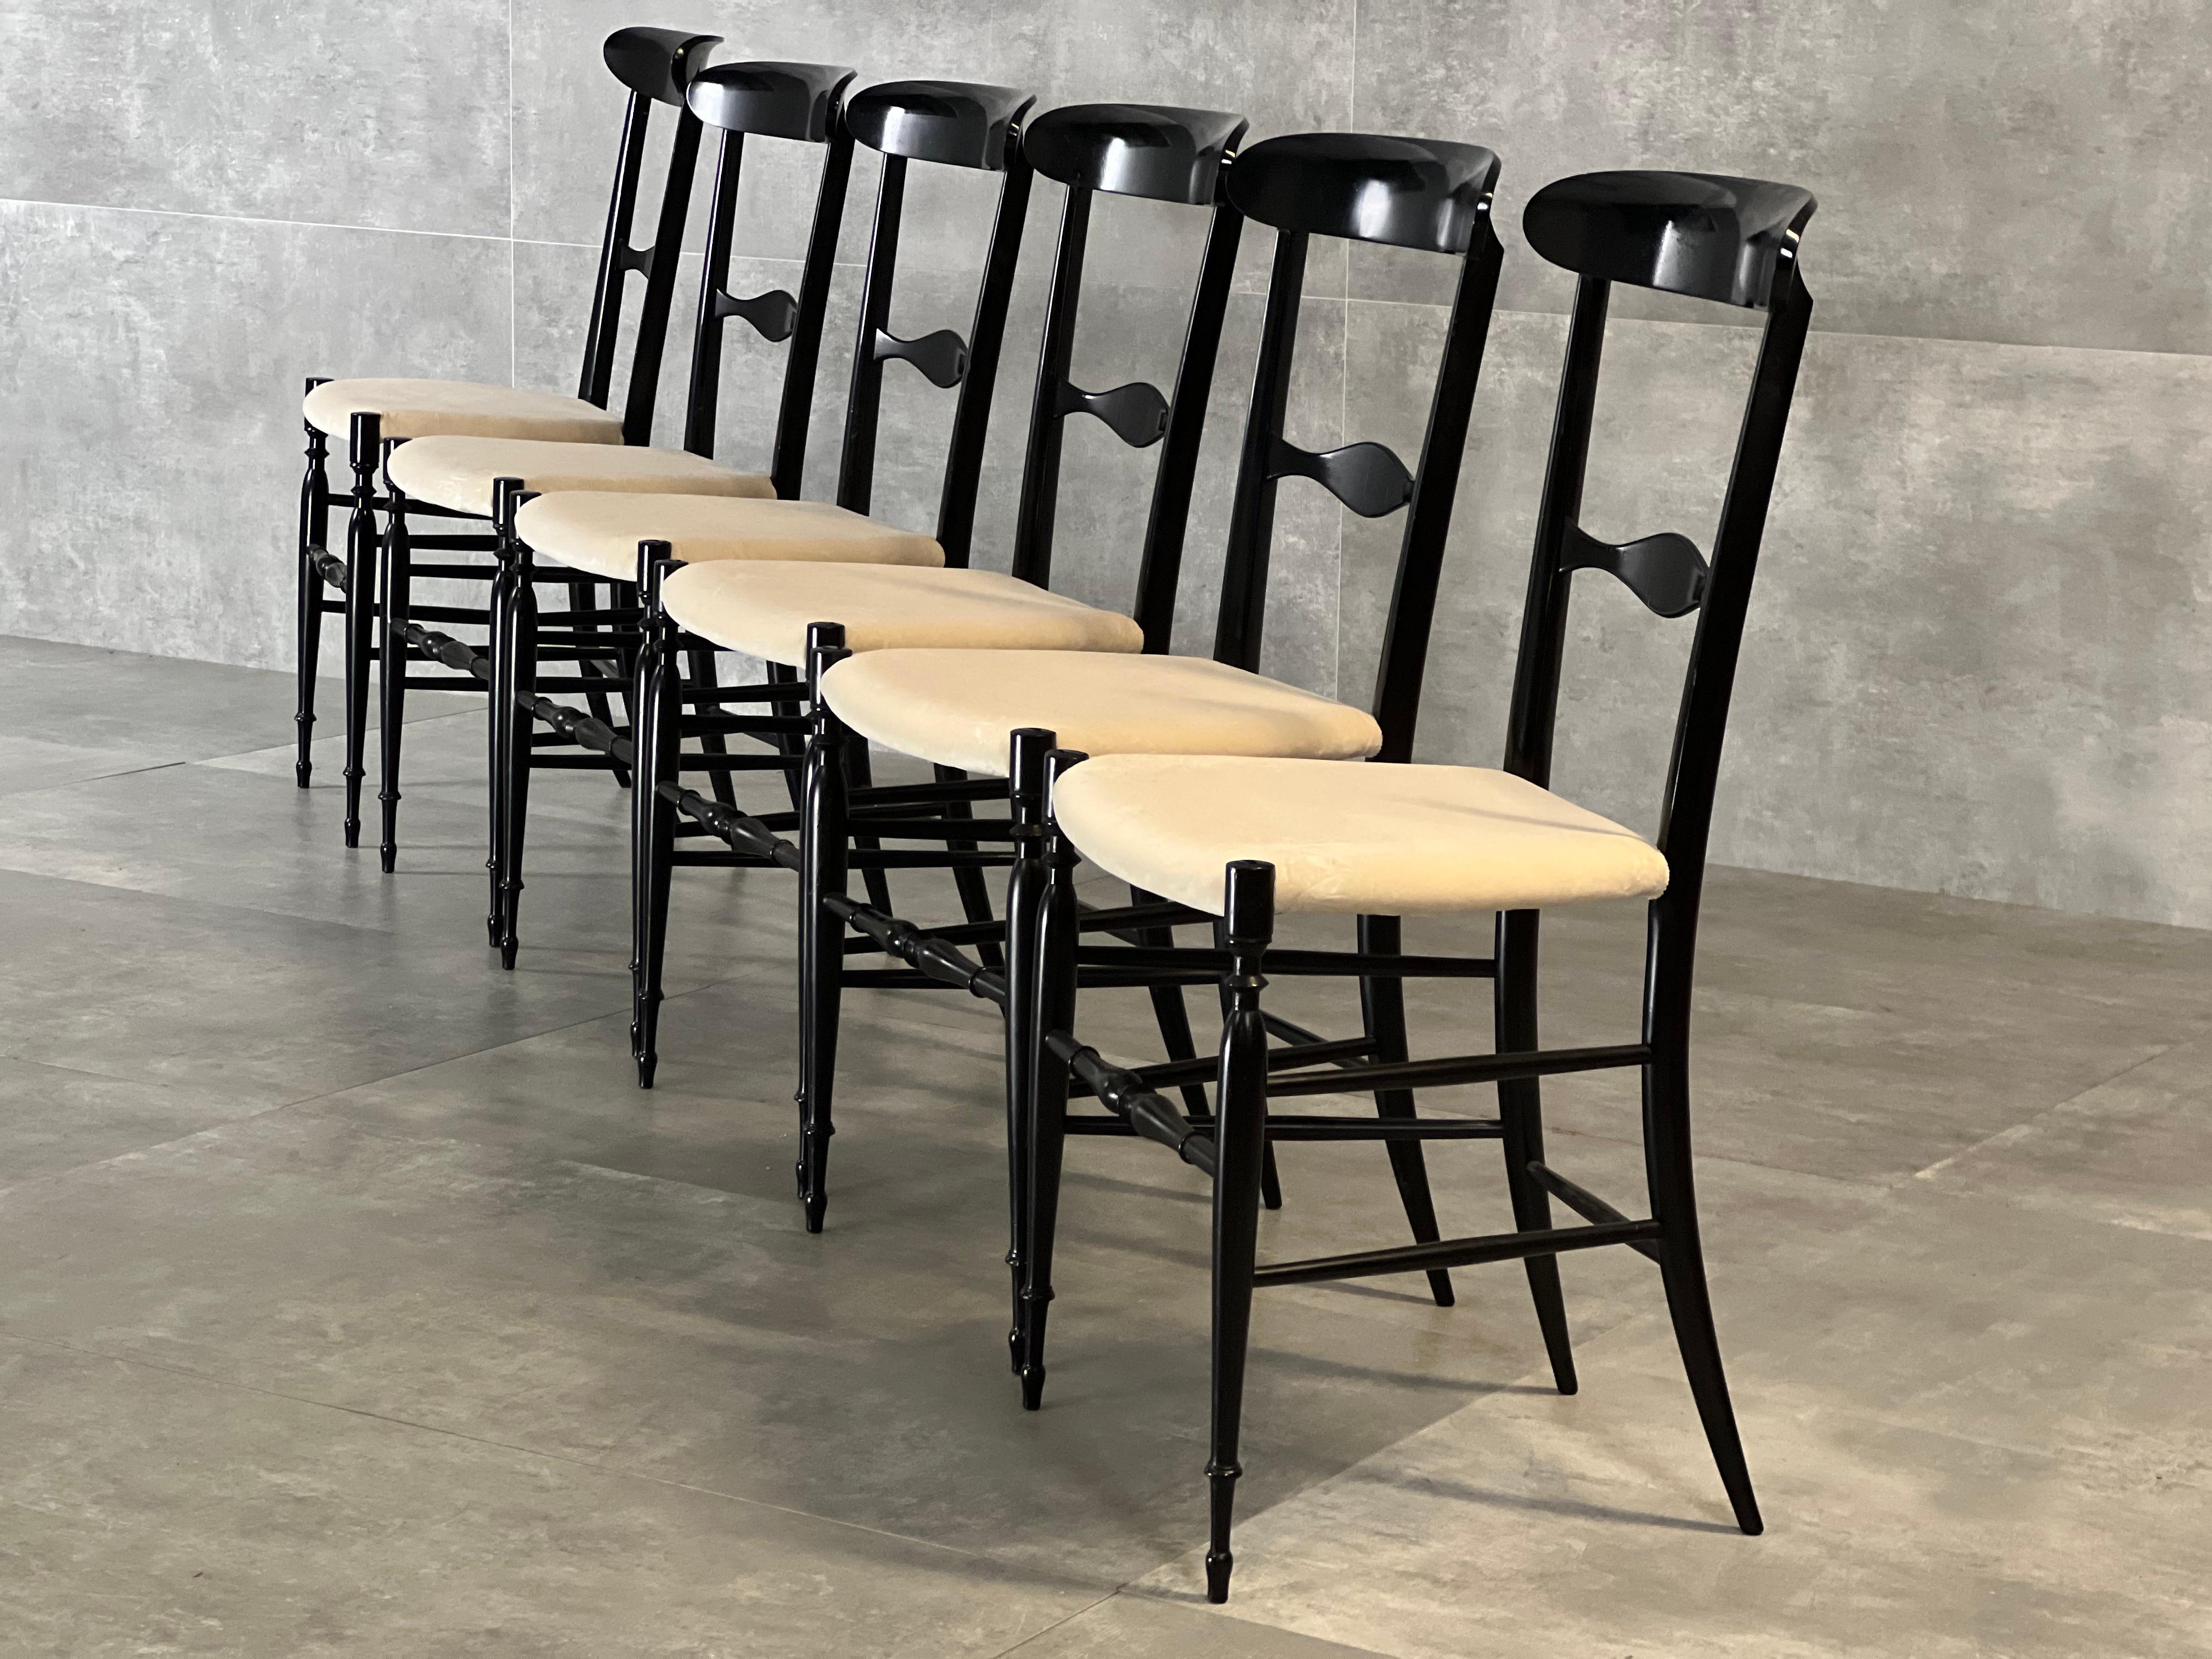 Set of 6 Fratelli Levaggi Dining Chairs by Campanino Chiavari, Italy, 1950s For Sale 1